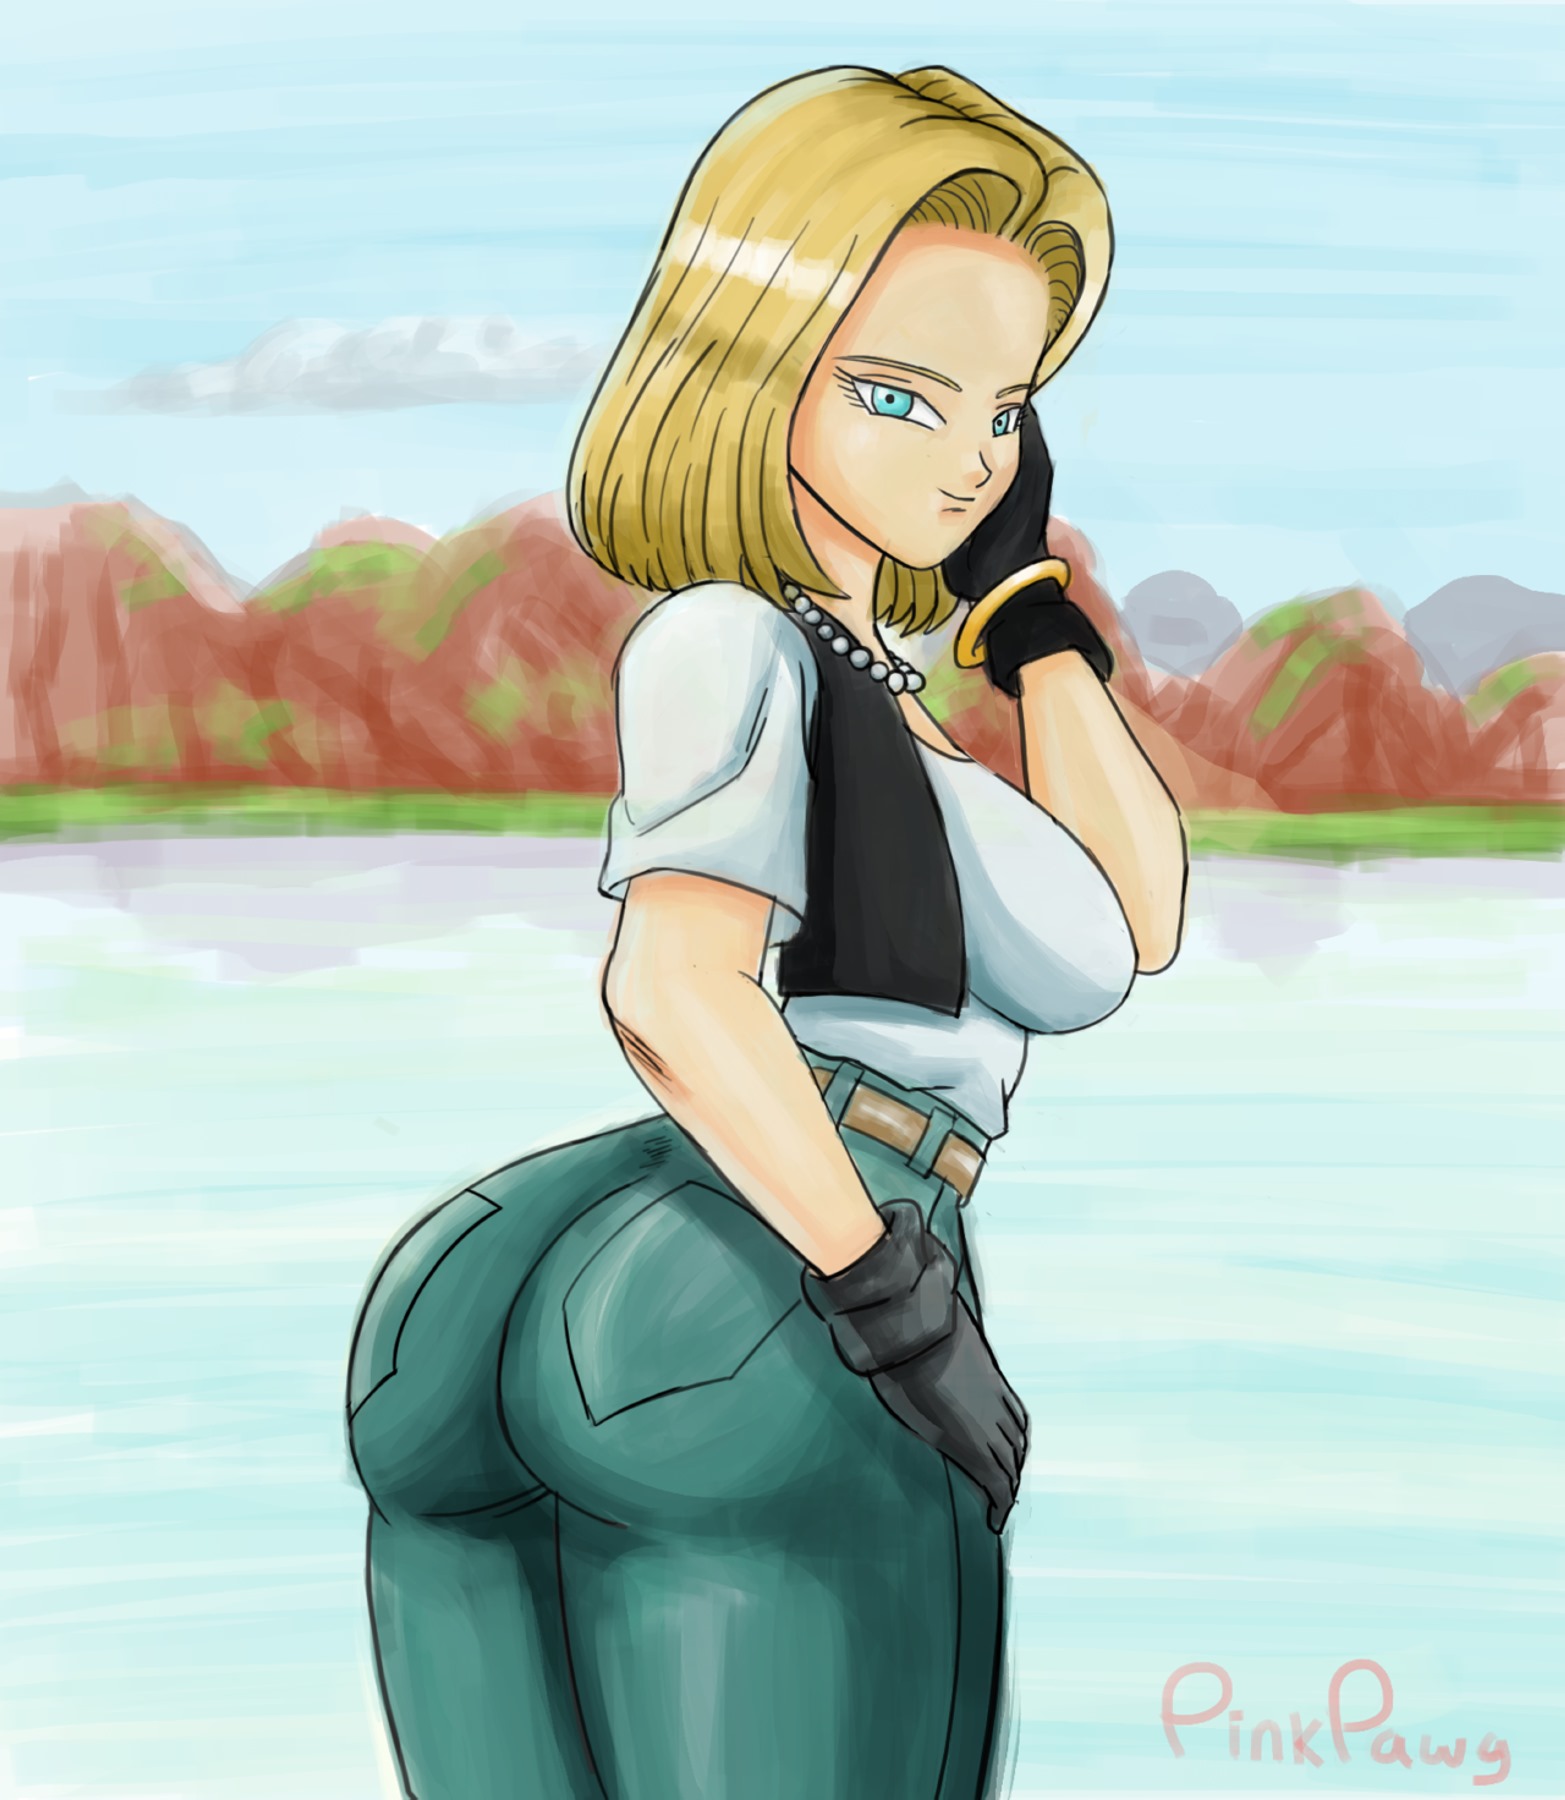 Android 18 Porn Girl - Android 18 Goes Inside Cell (Dragon Ball Z) - Porn Cartoon Comics